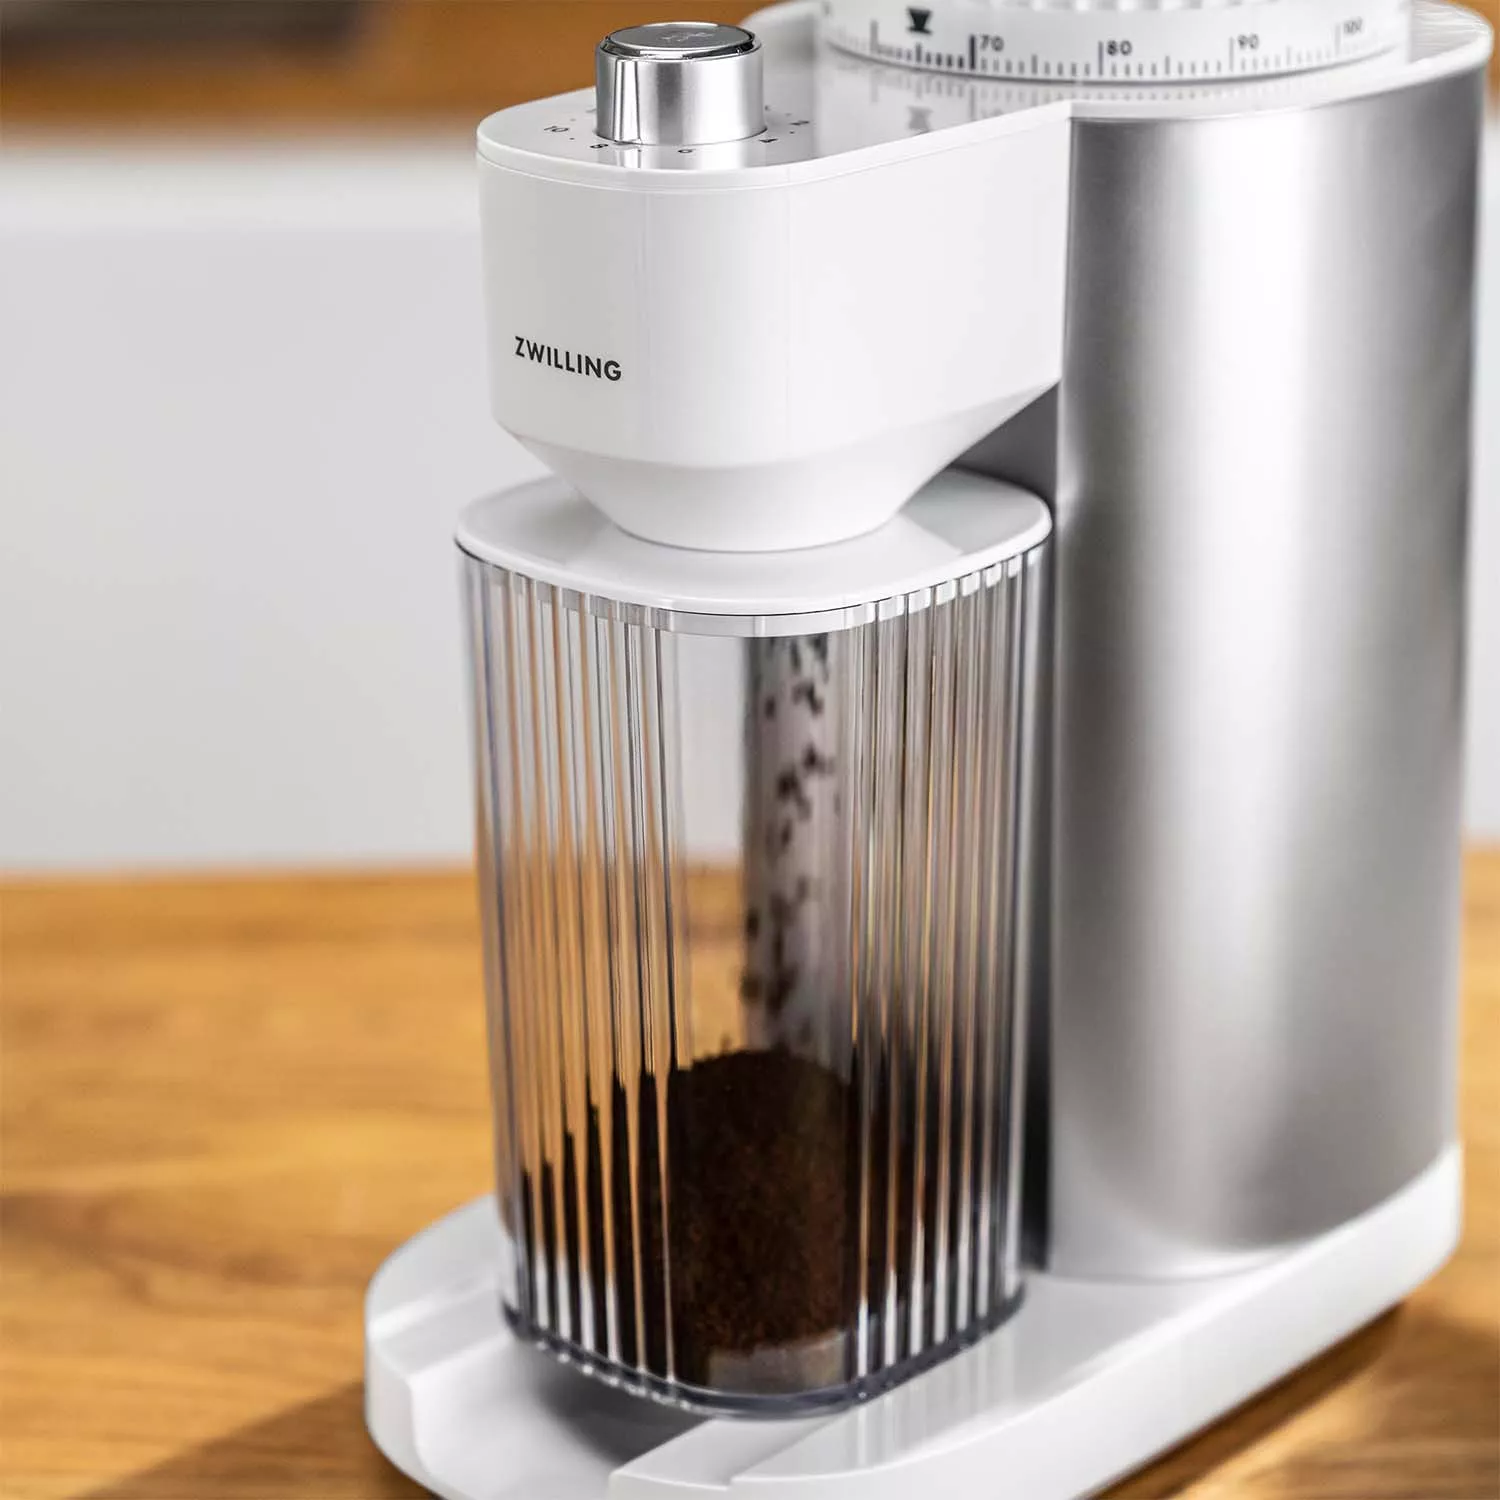 Wirsh Conical Burr Coffee Grinder - Coffee grinder with Stainless Steel  Conical Burr Mill, 80 Grind Settings from Fine to Coarse, Electric Coffee